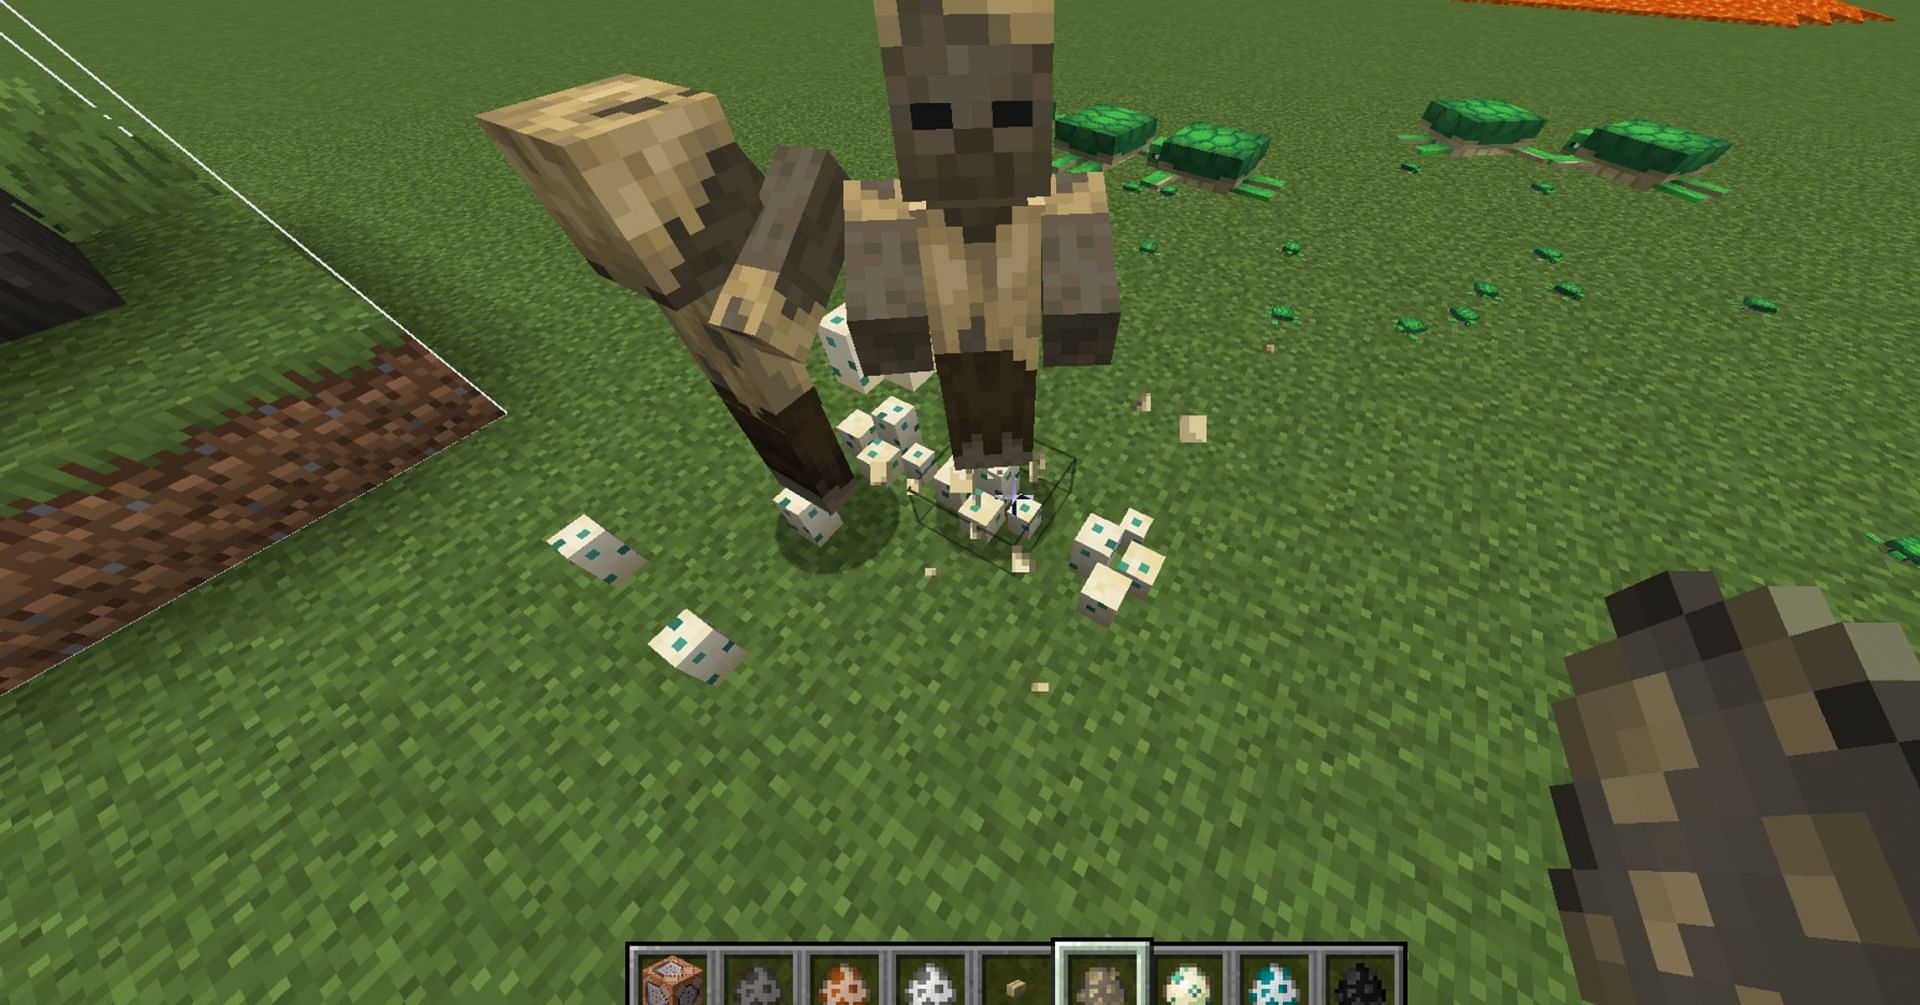 Husks will seek out and stomp on turtle eggs (Image via Minecraft Wiki)